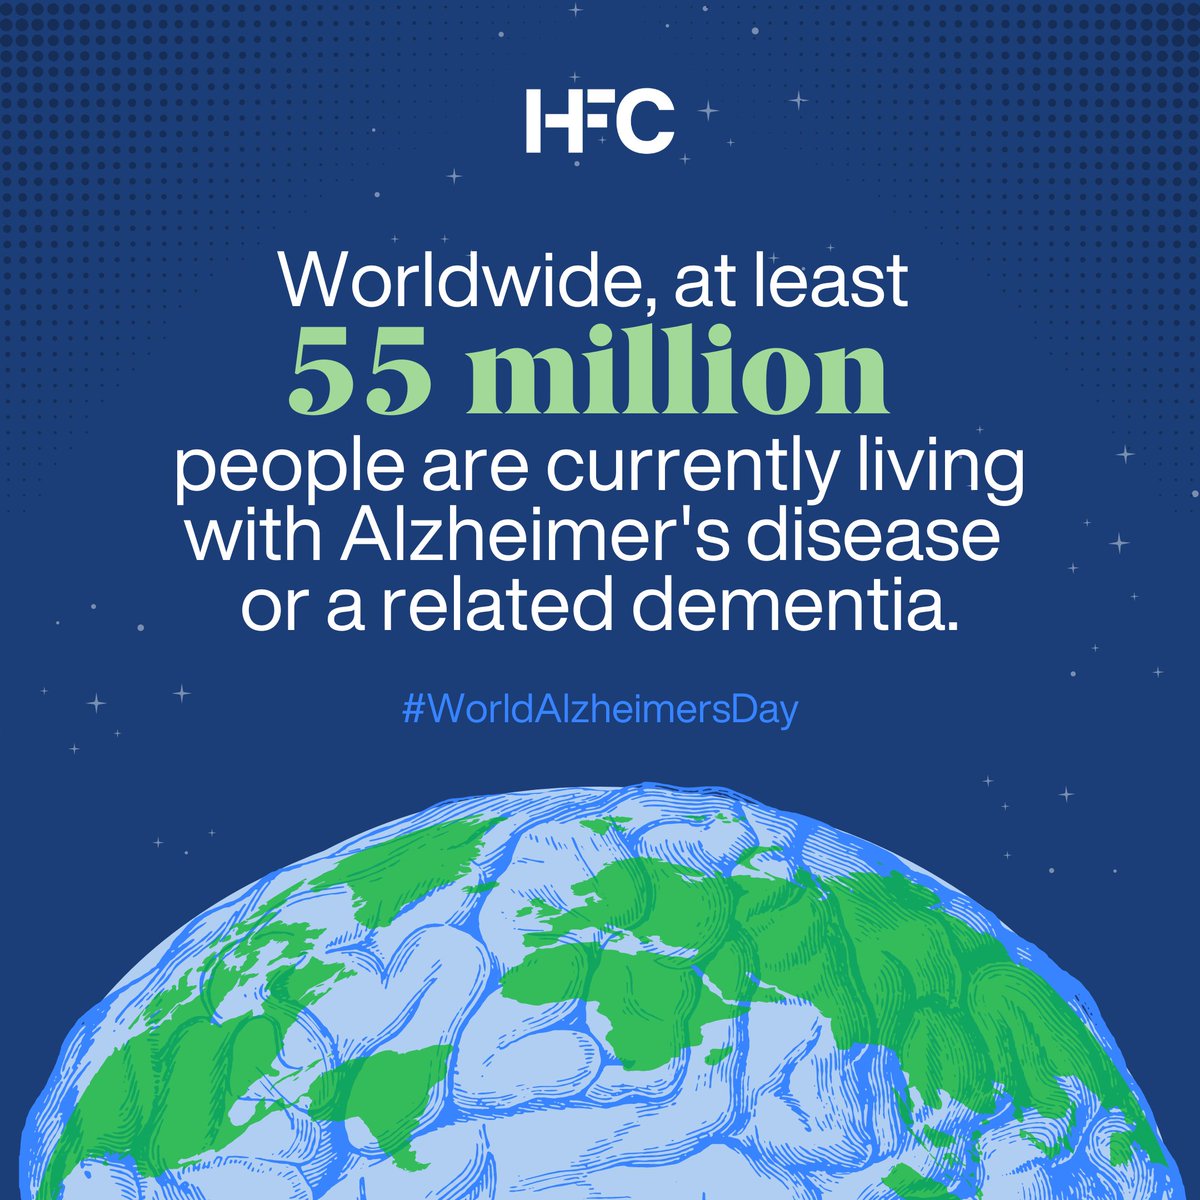 There are over 55 million people worldwide living with Alzheimer's or a related dementia. Beyond the statistics are real lives and real stories. This #WorldAlzheimersDay, join me in bringing light to Alzheimer’s. 💜 #kickalzintheballz